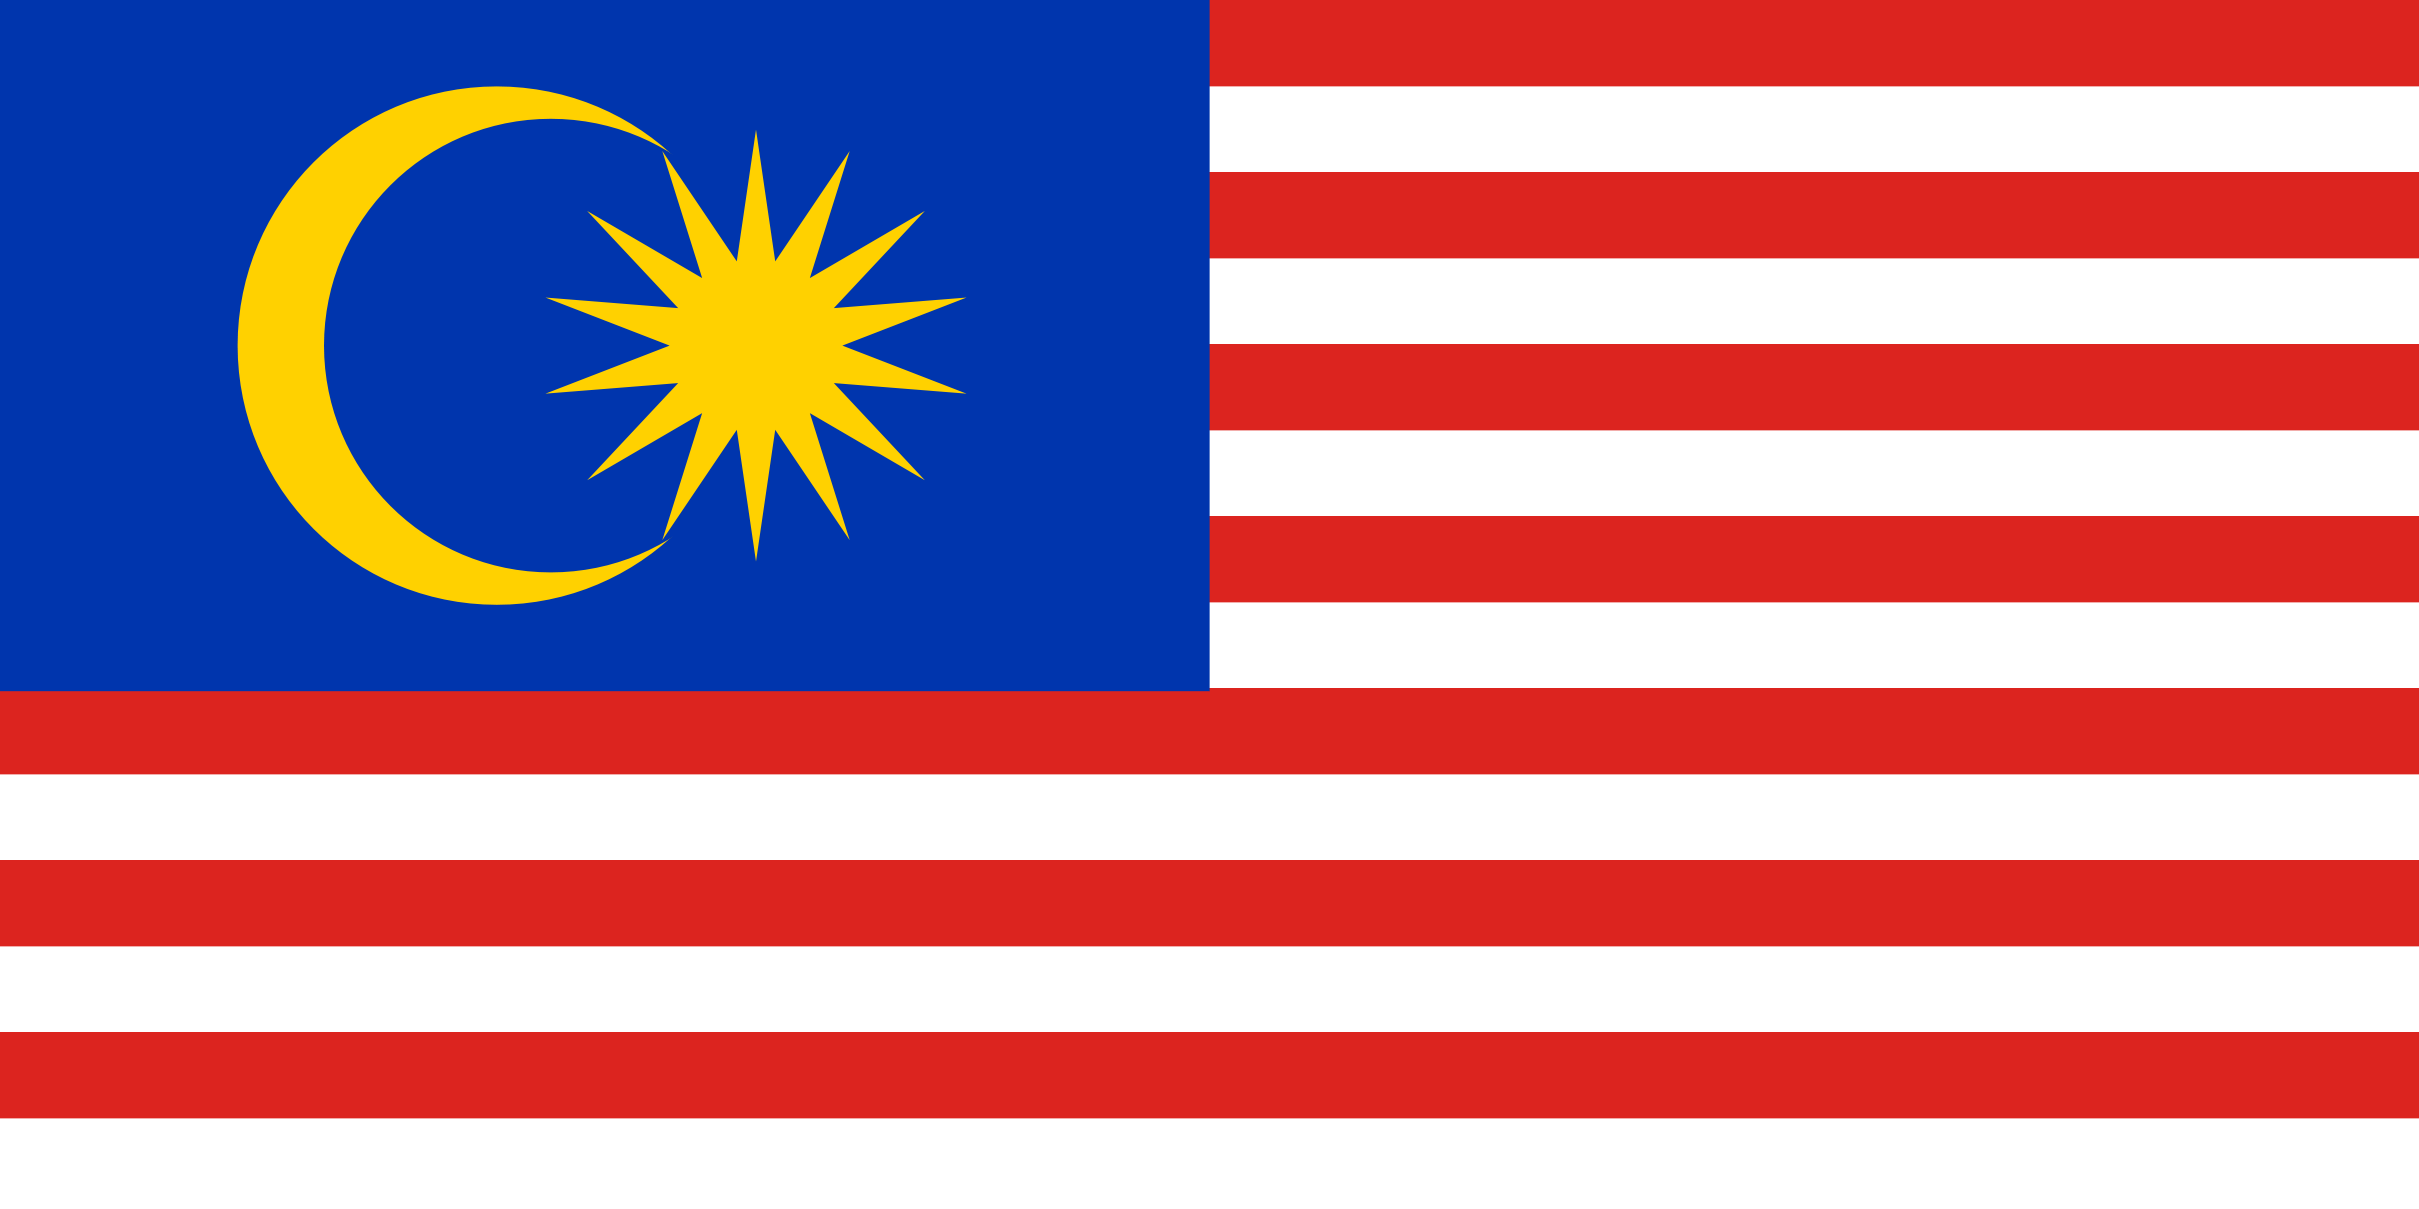 the image shows the malaysian flag